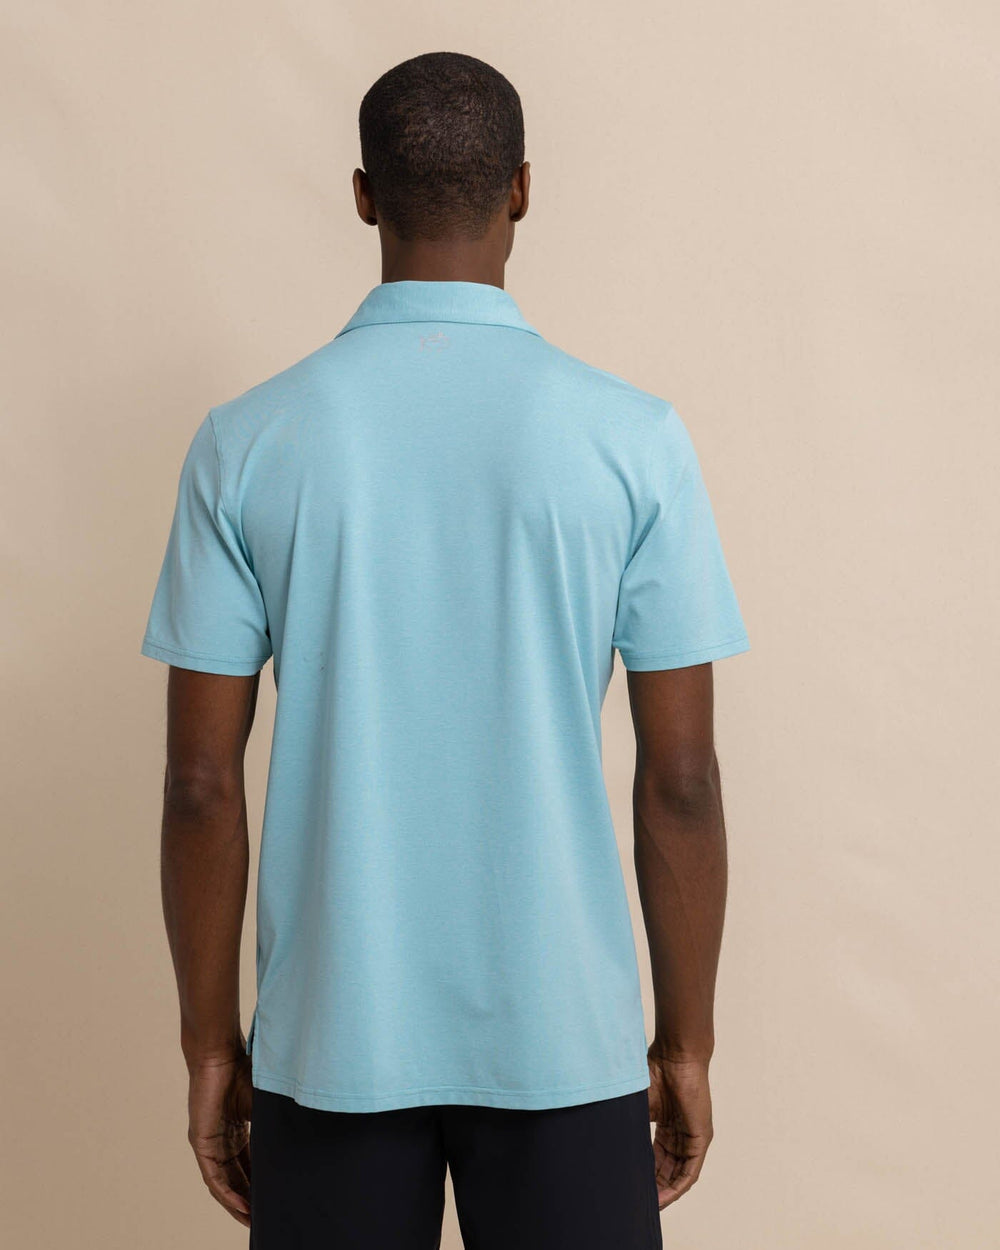 The back view of the Southern Tide brrr eeze Heather Performance Polo Shirt by Southern Tide - Heather Marine Blue